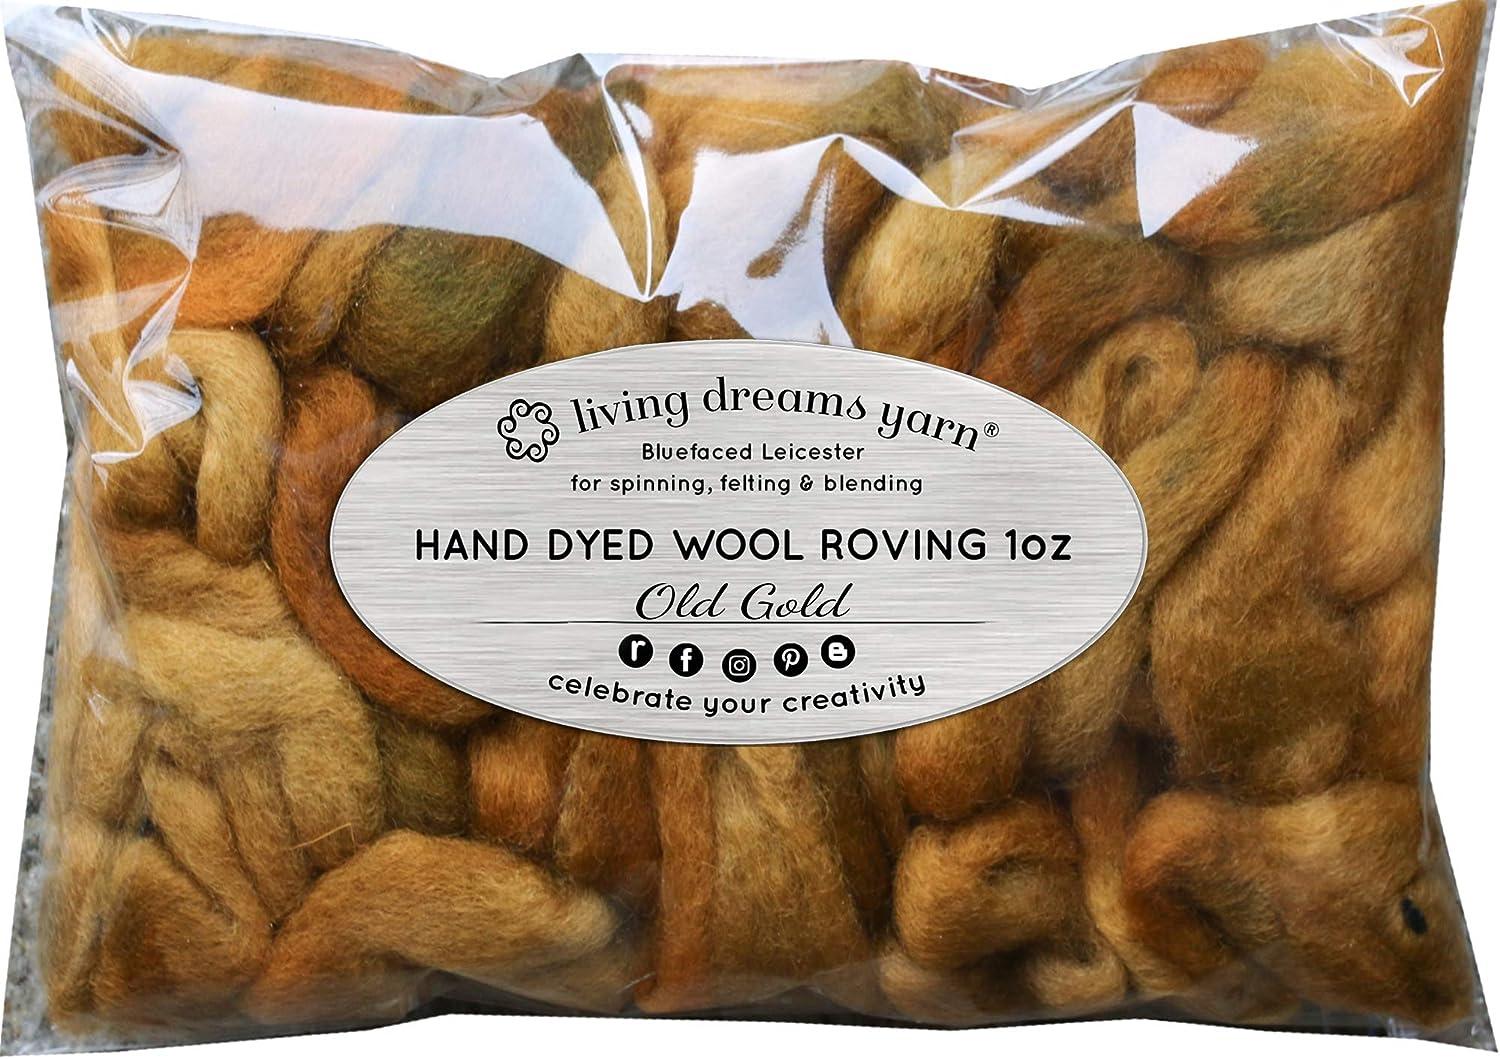 Wool Roving Hand Dyed. Super Soft BFL Combed Top Pre-Drafted for Easy Hand  Spinning. Artisanal Craft Fiber ideal for Felting Weaving Wall Hangings and  Embellishments. 1 Ounce. Old Gold 1 oz Old